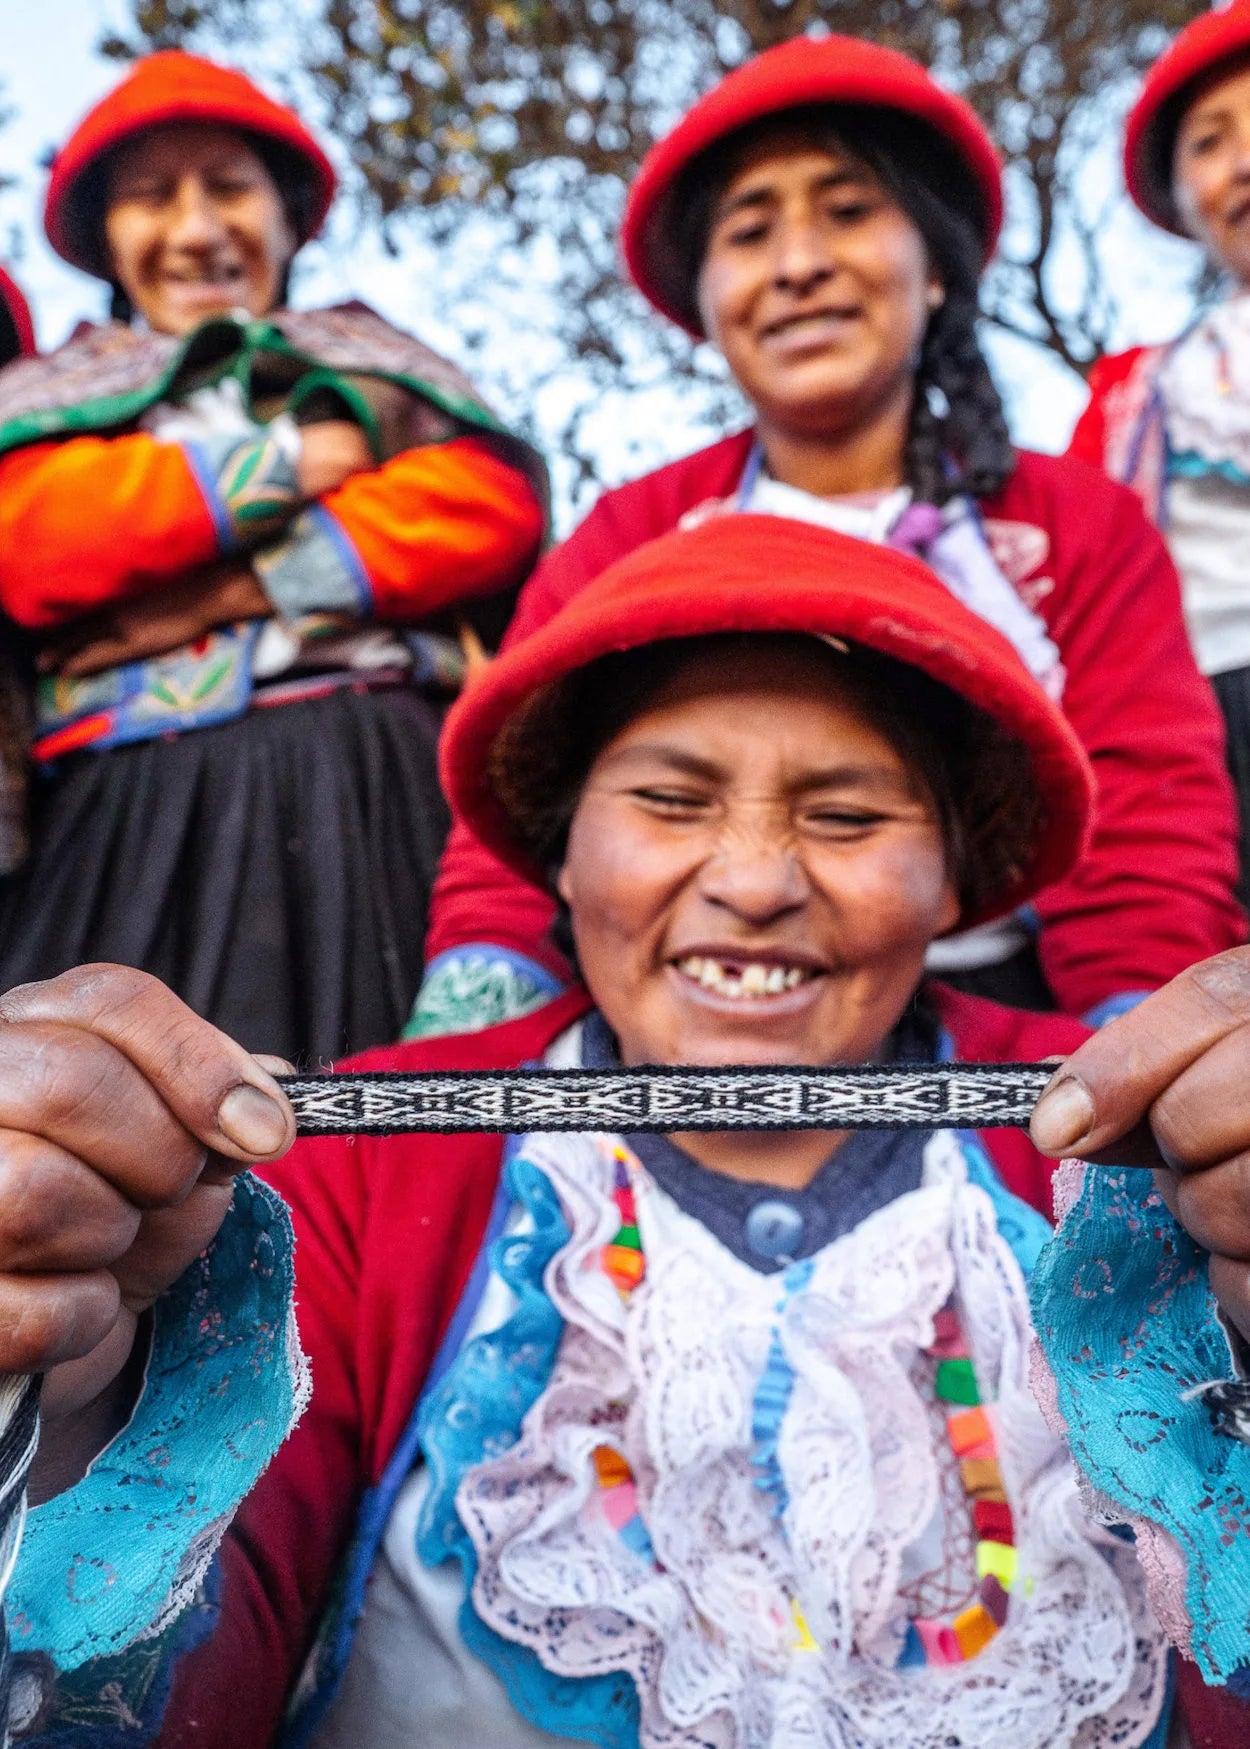 A group of quechua weavers smiling and showing an alpaca bracelet